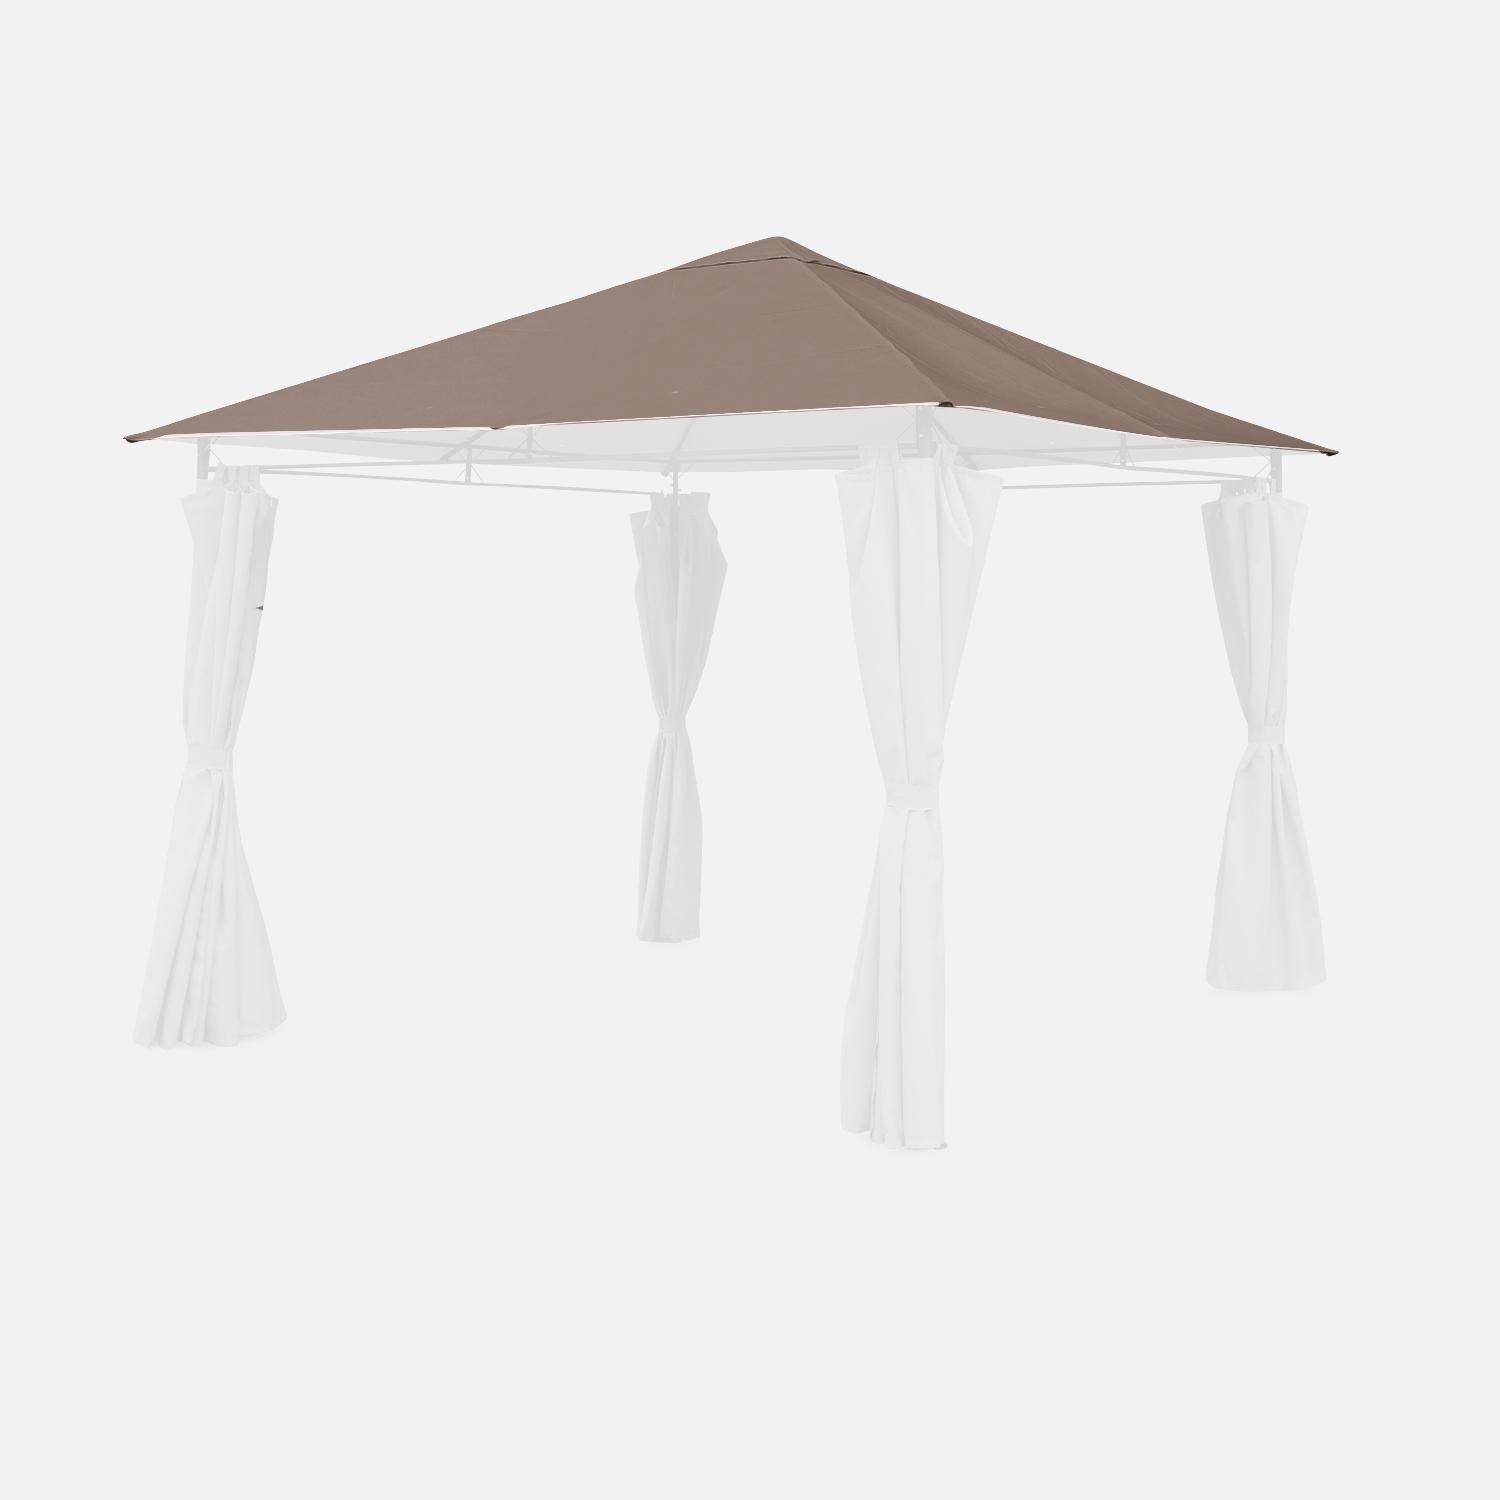 Taupe roof cover for Elusa 3x3m arbour - pergola cover, replacement cover,sweeek,Photo1